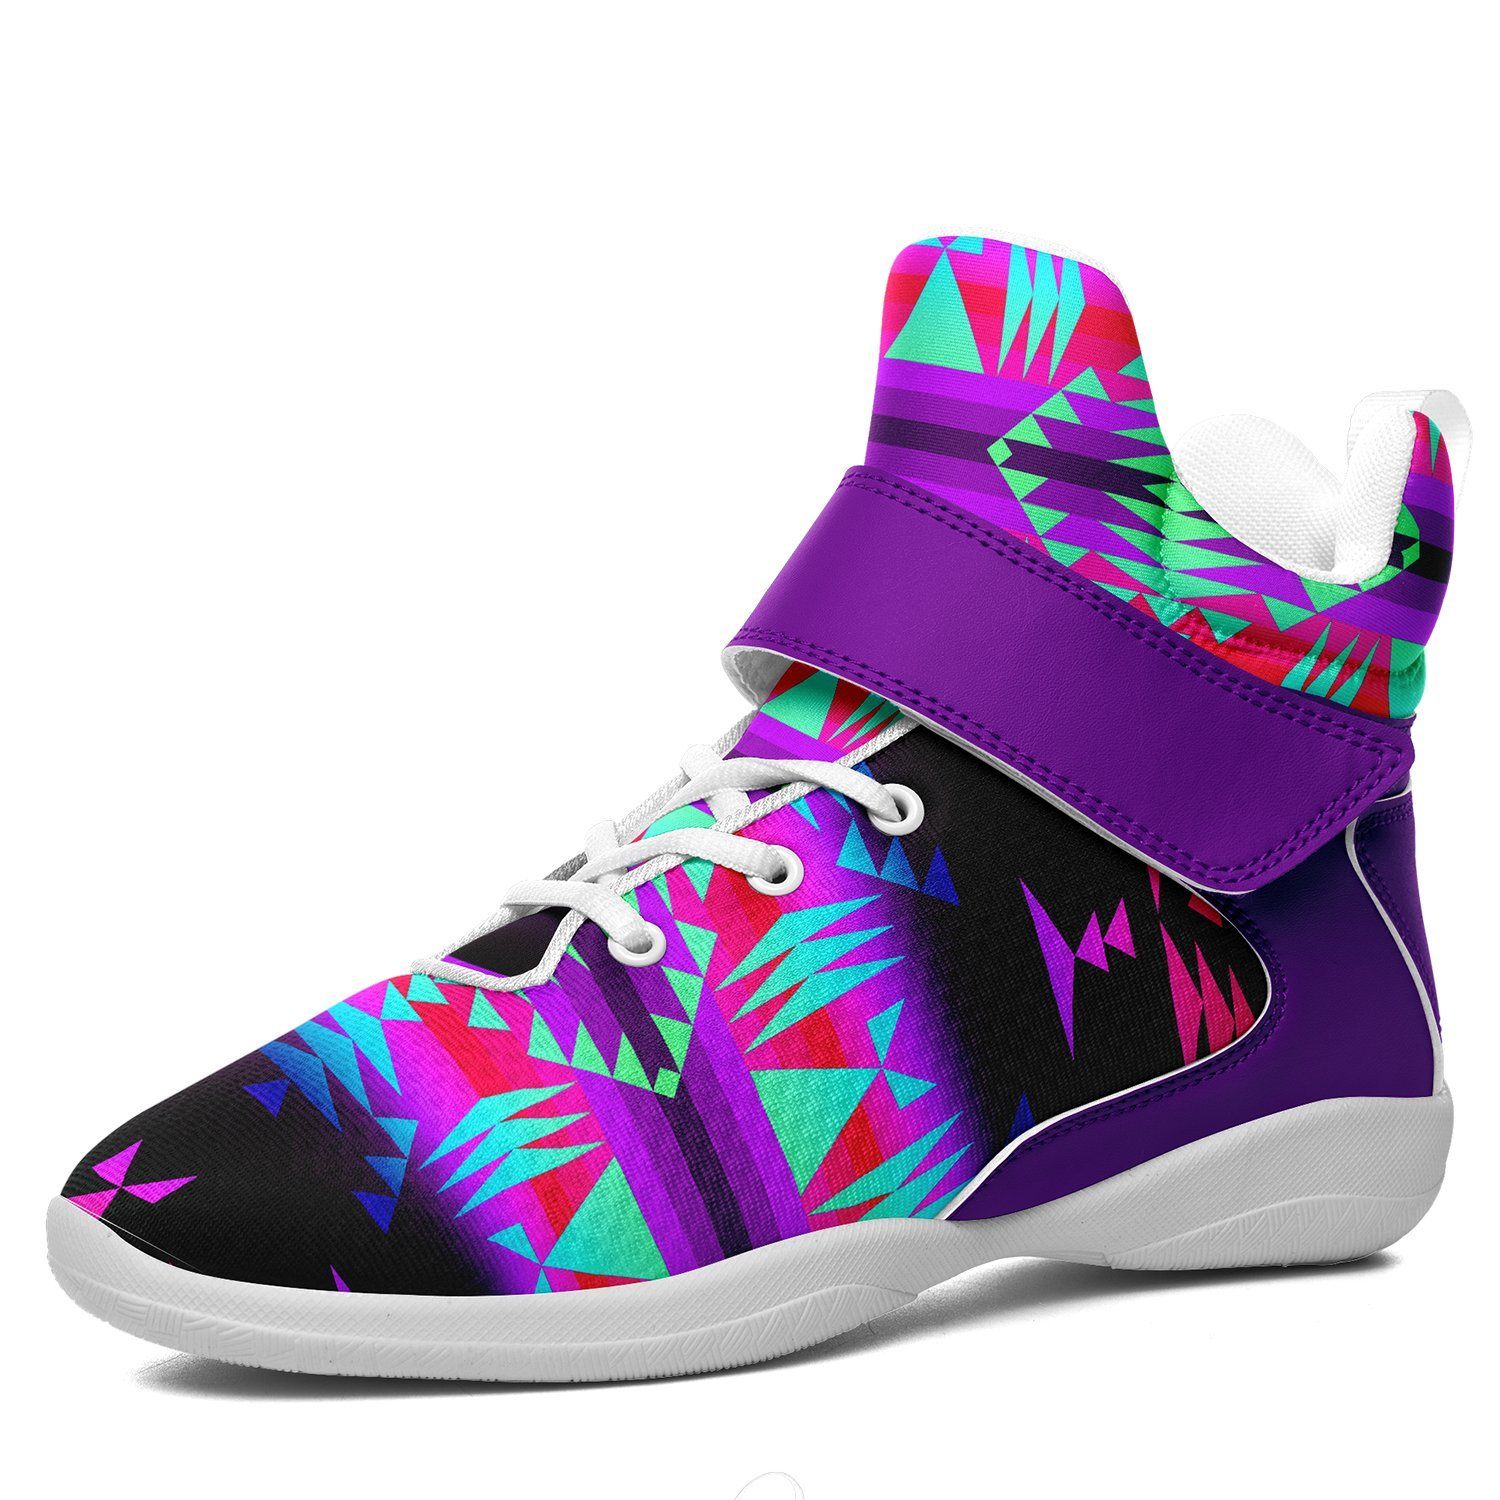 Between the Rocky Mountains Ipottaa Basketball / Sport High Top Shoes - White Sole 49 Dzine US Men 7 / EUR 40 White Sole with Indigo Strap 